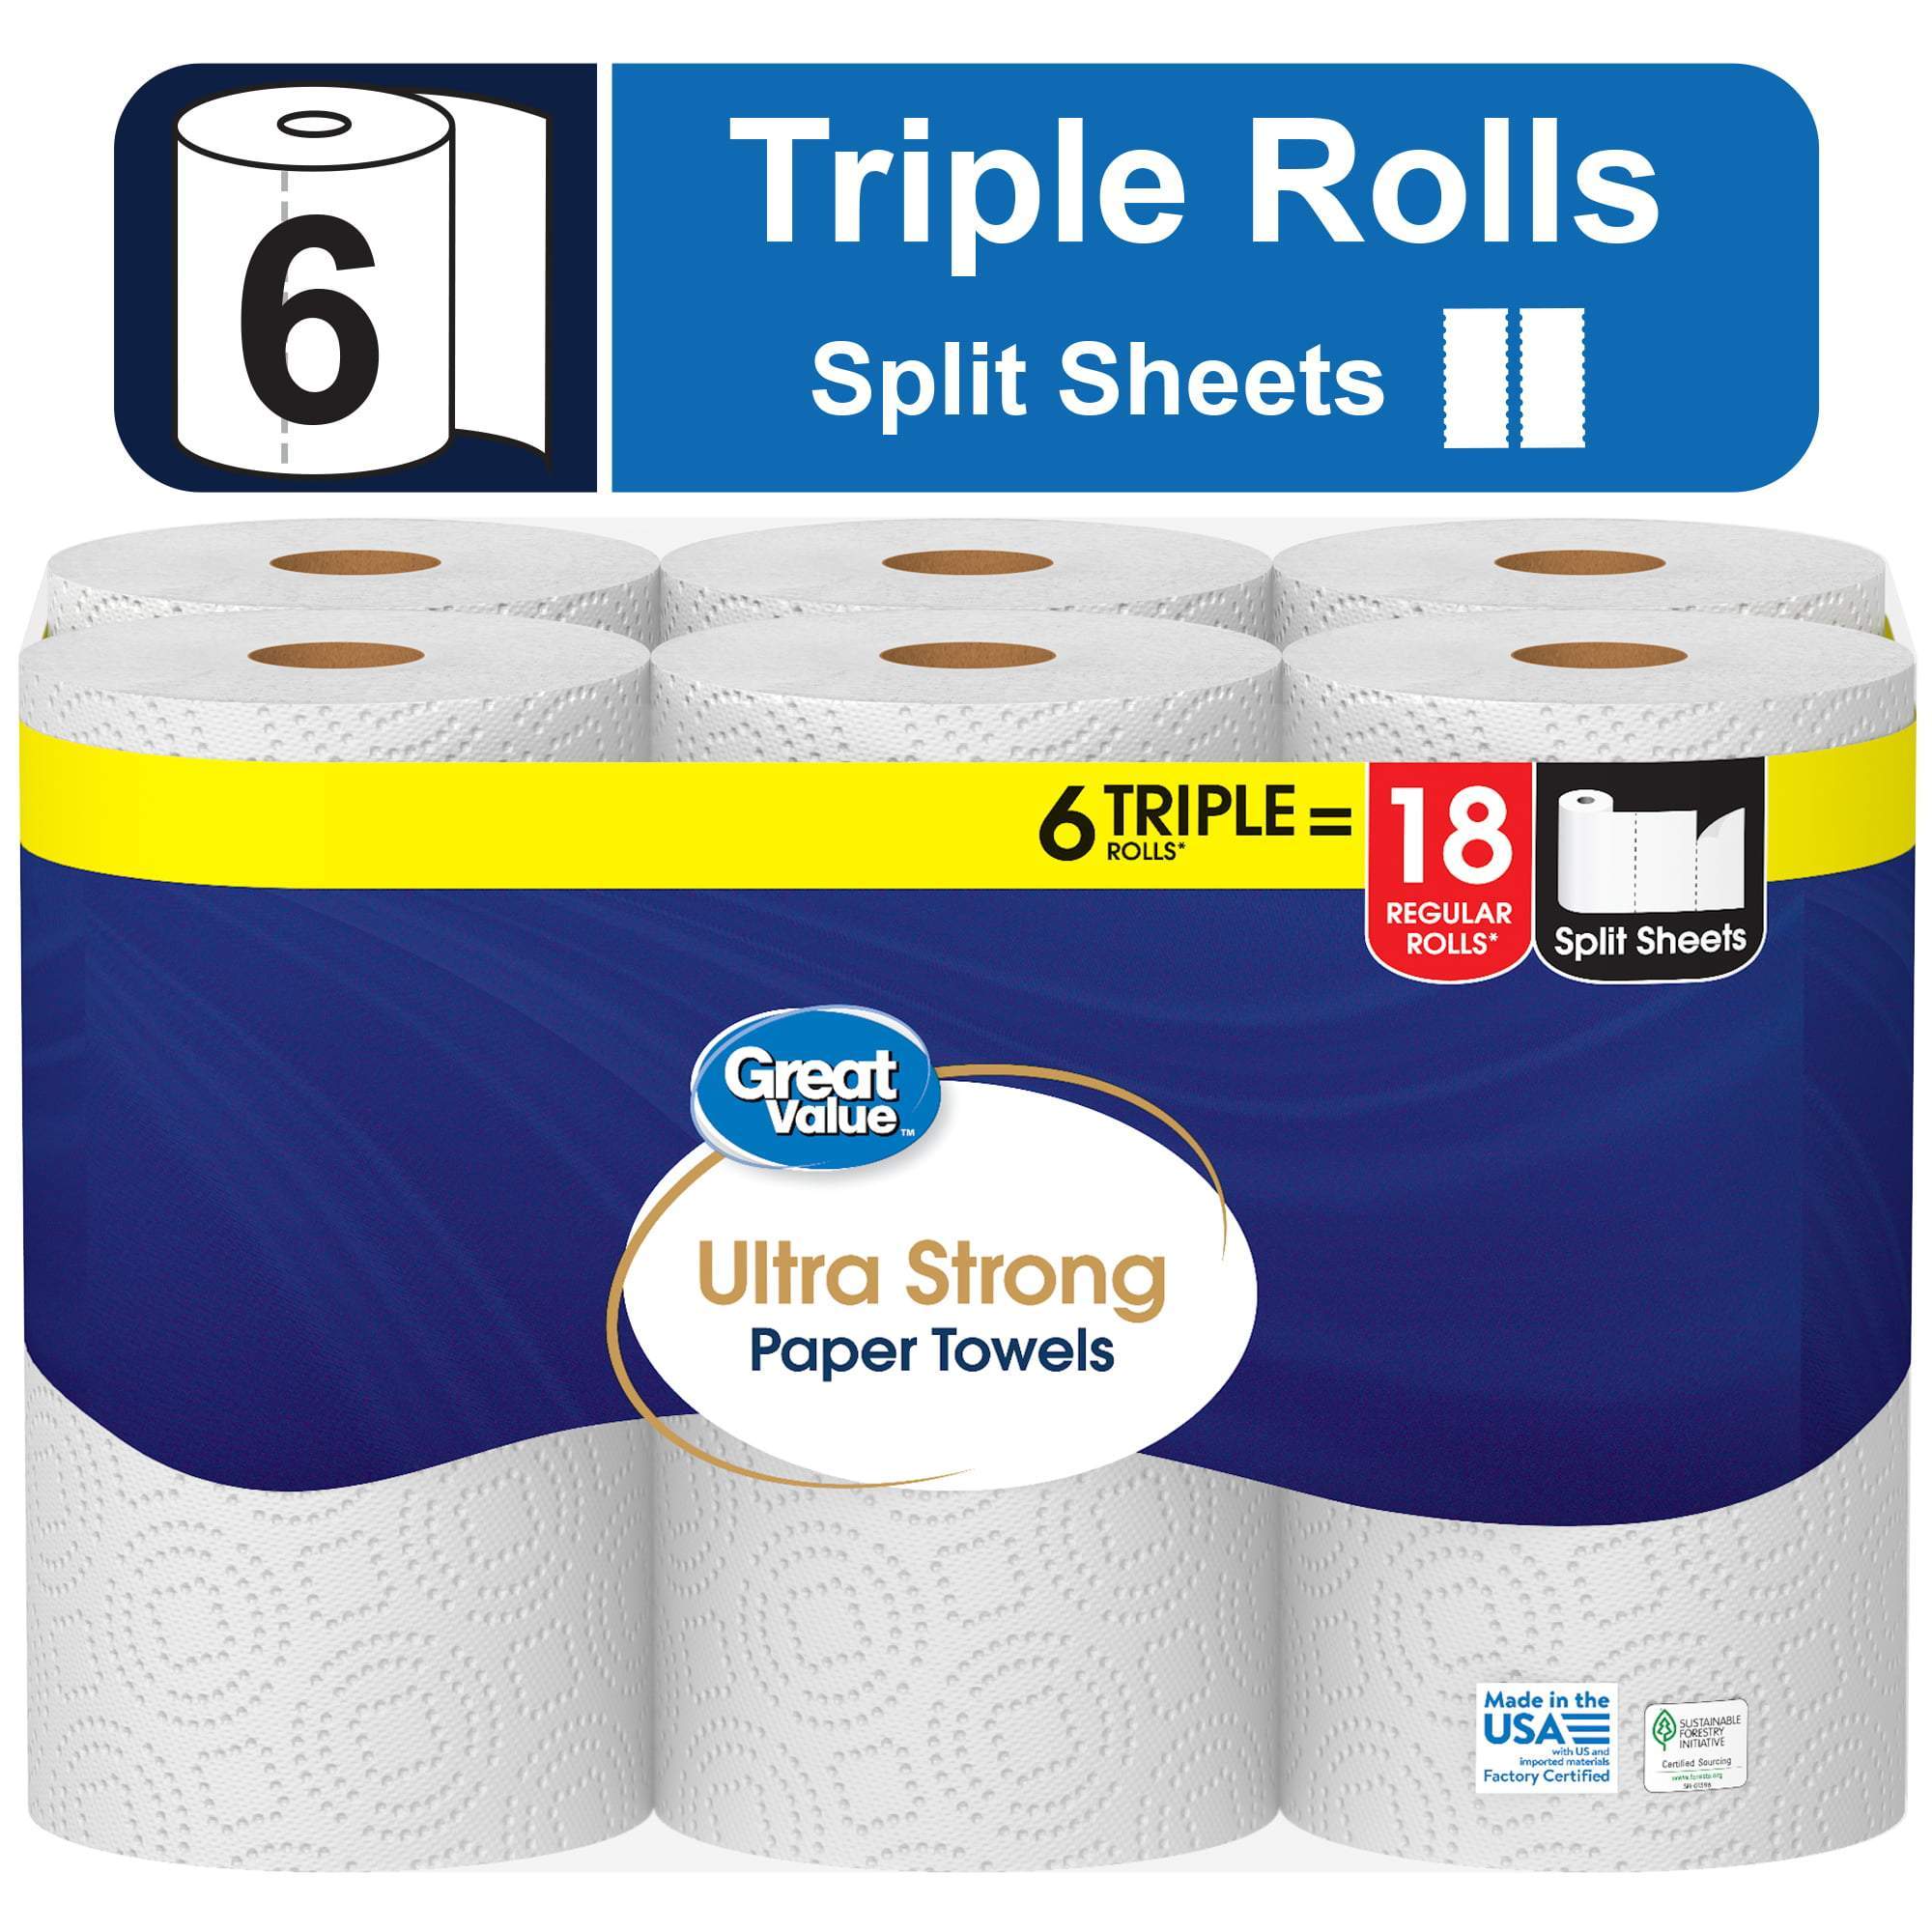 Great Value Ultra Strong Paper Towels, White, 6 Triple Rolls ...